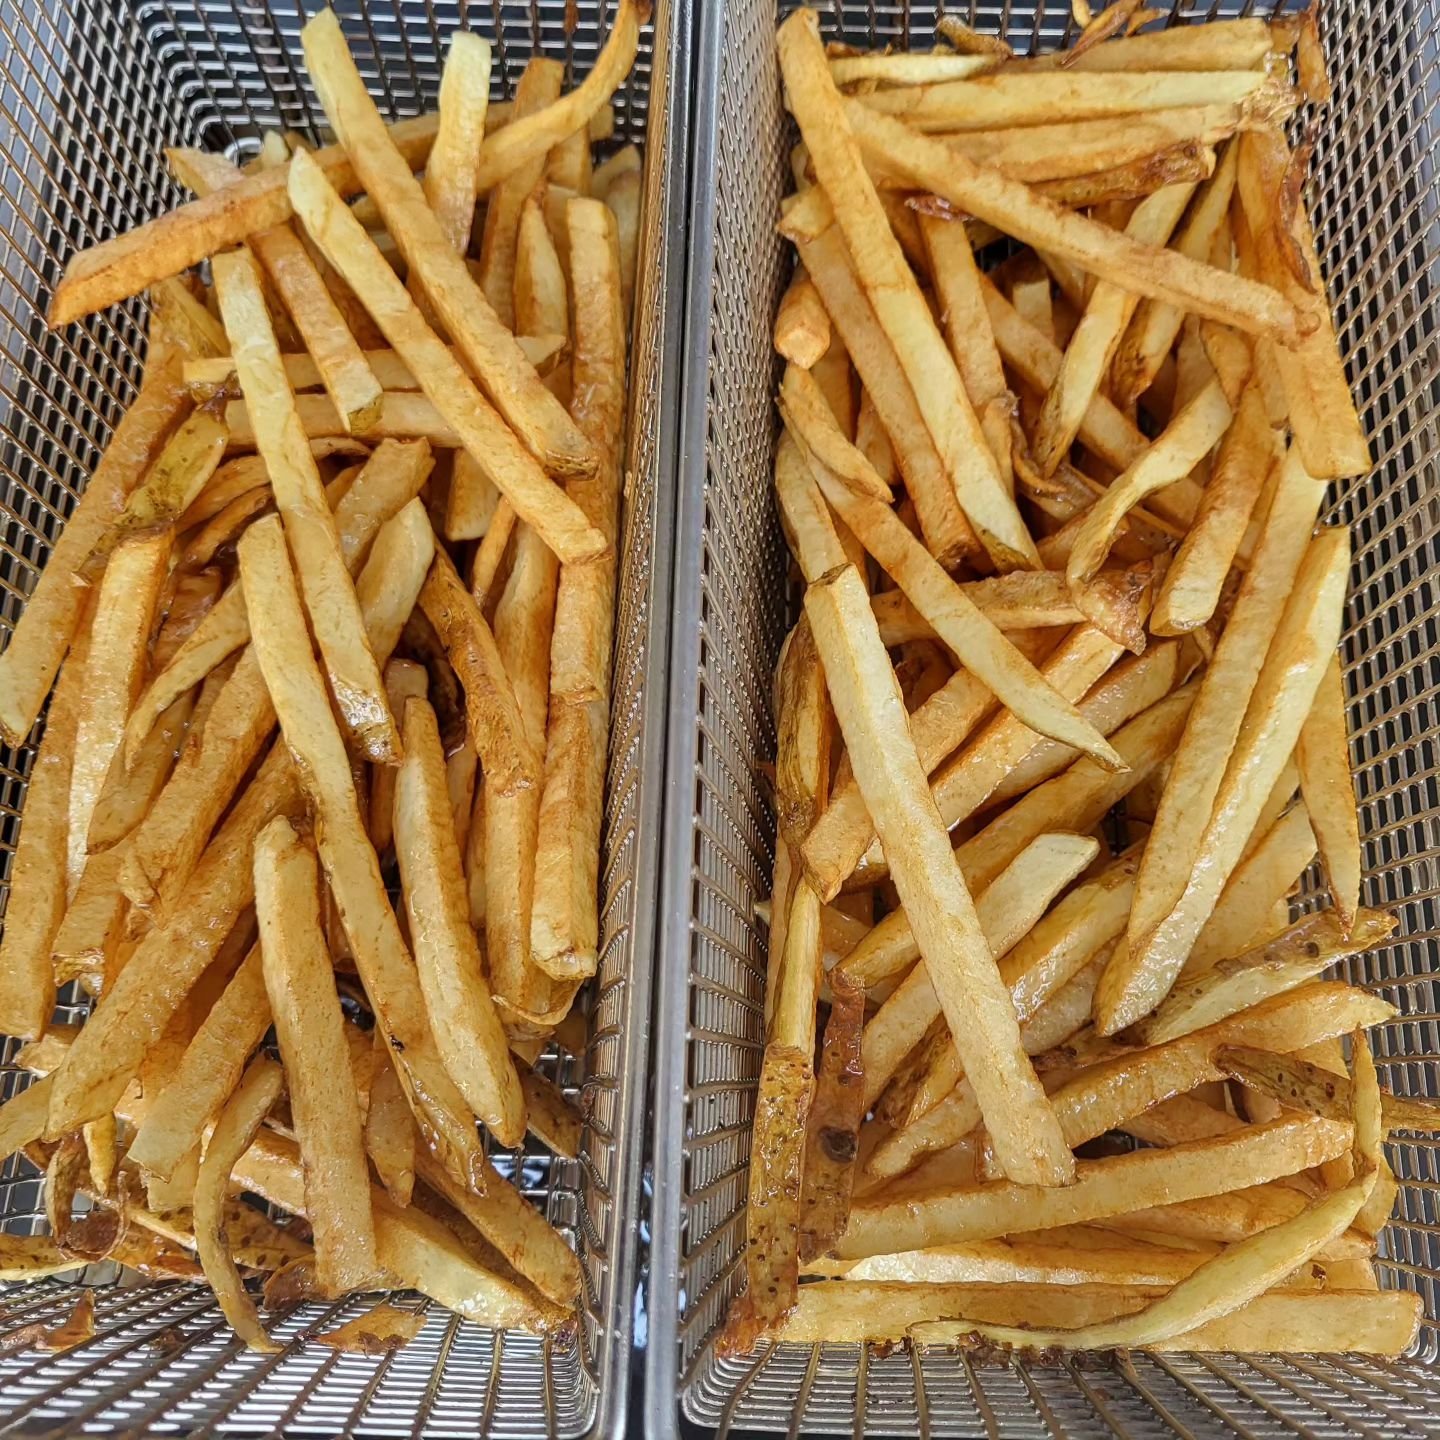 PBJ open tomorrow in Porters Lake from 12:30-6:30........stop by to try some delicious homemade fries